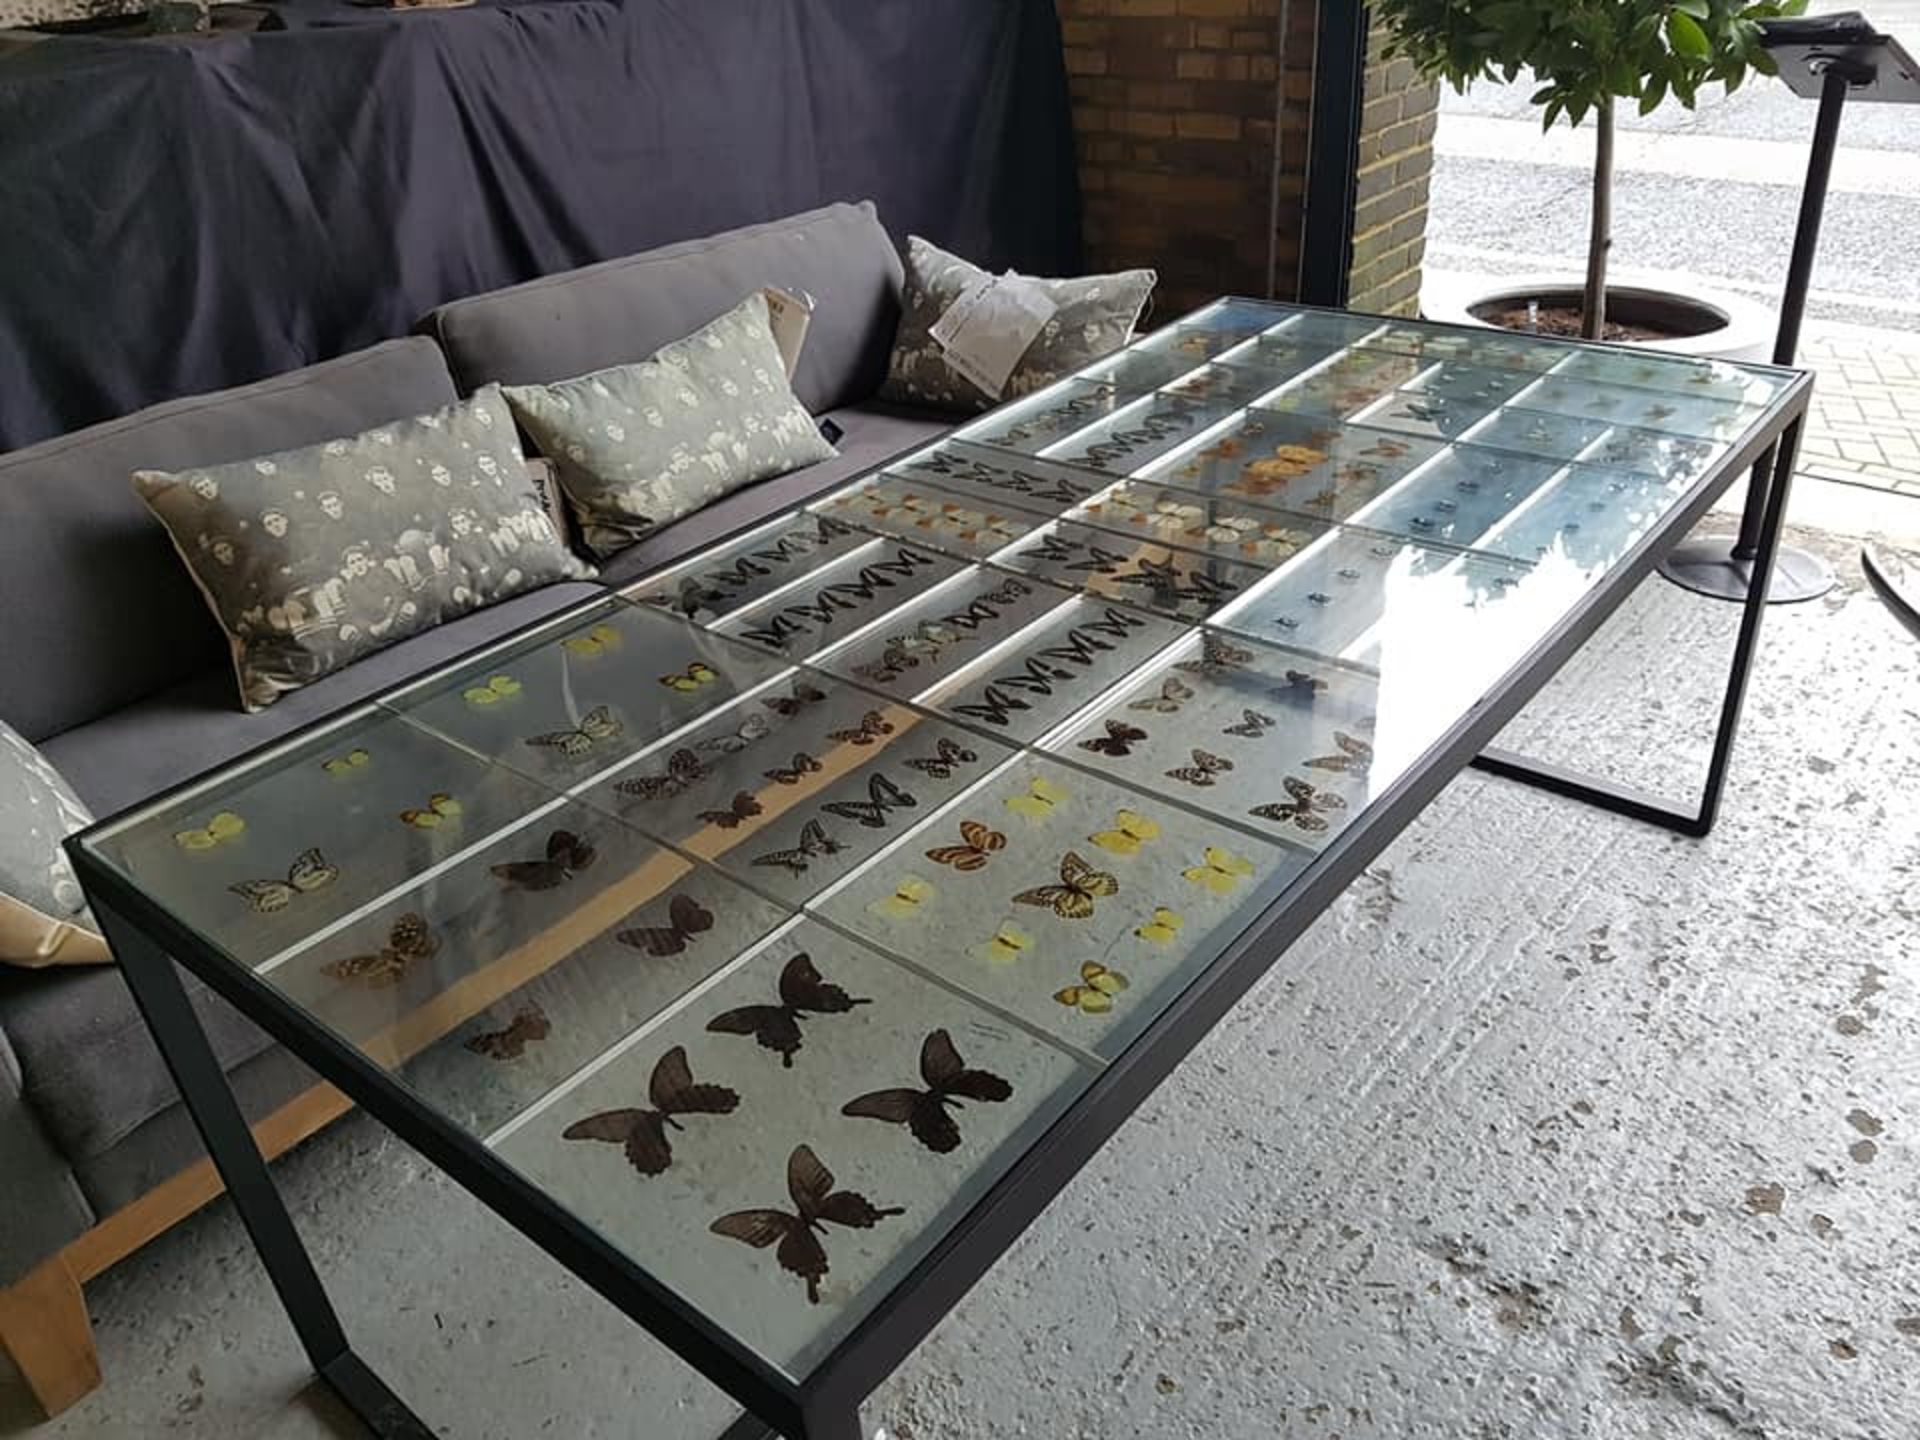 Butterfly Dining Table 197cm Acrylic & Plated Black 197 4 x 92 4 x 75cm RRP £6150 - Image 3 of 4